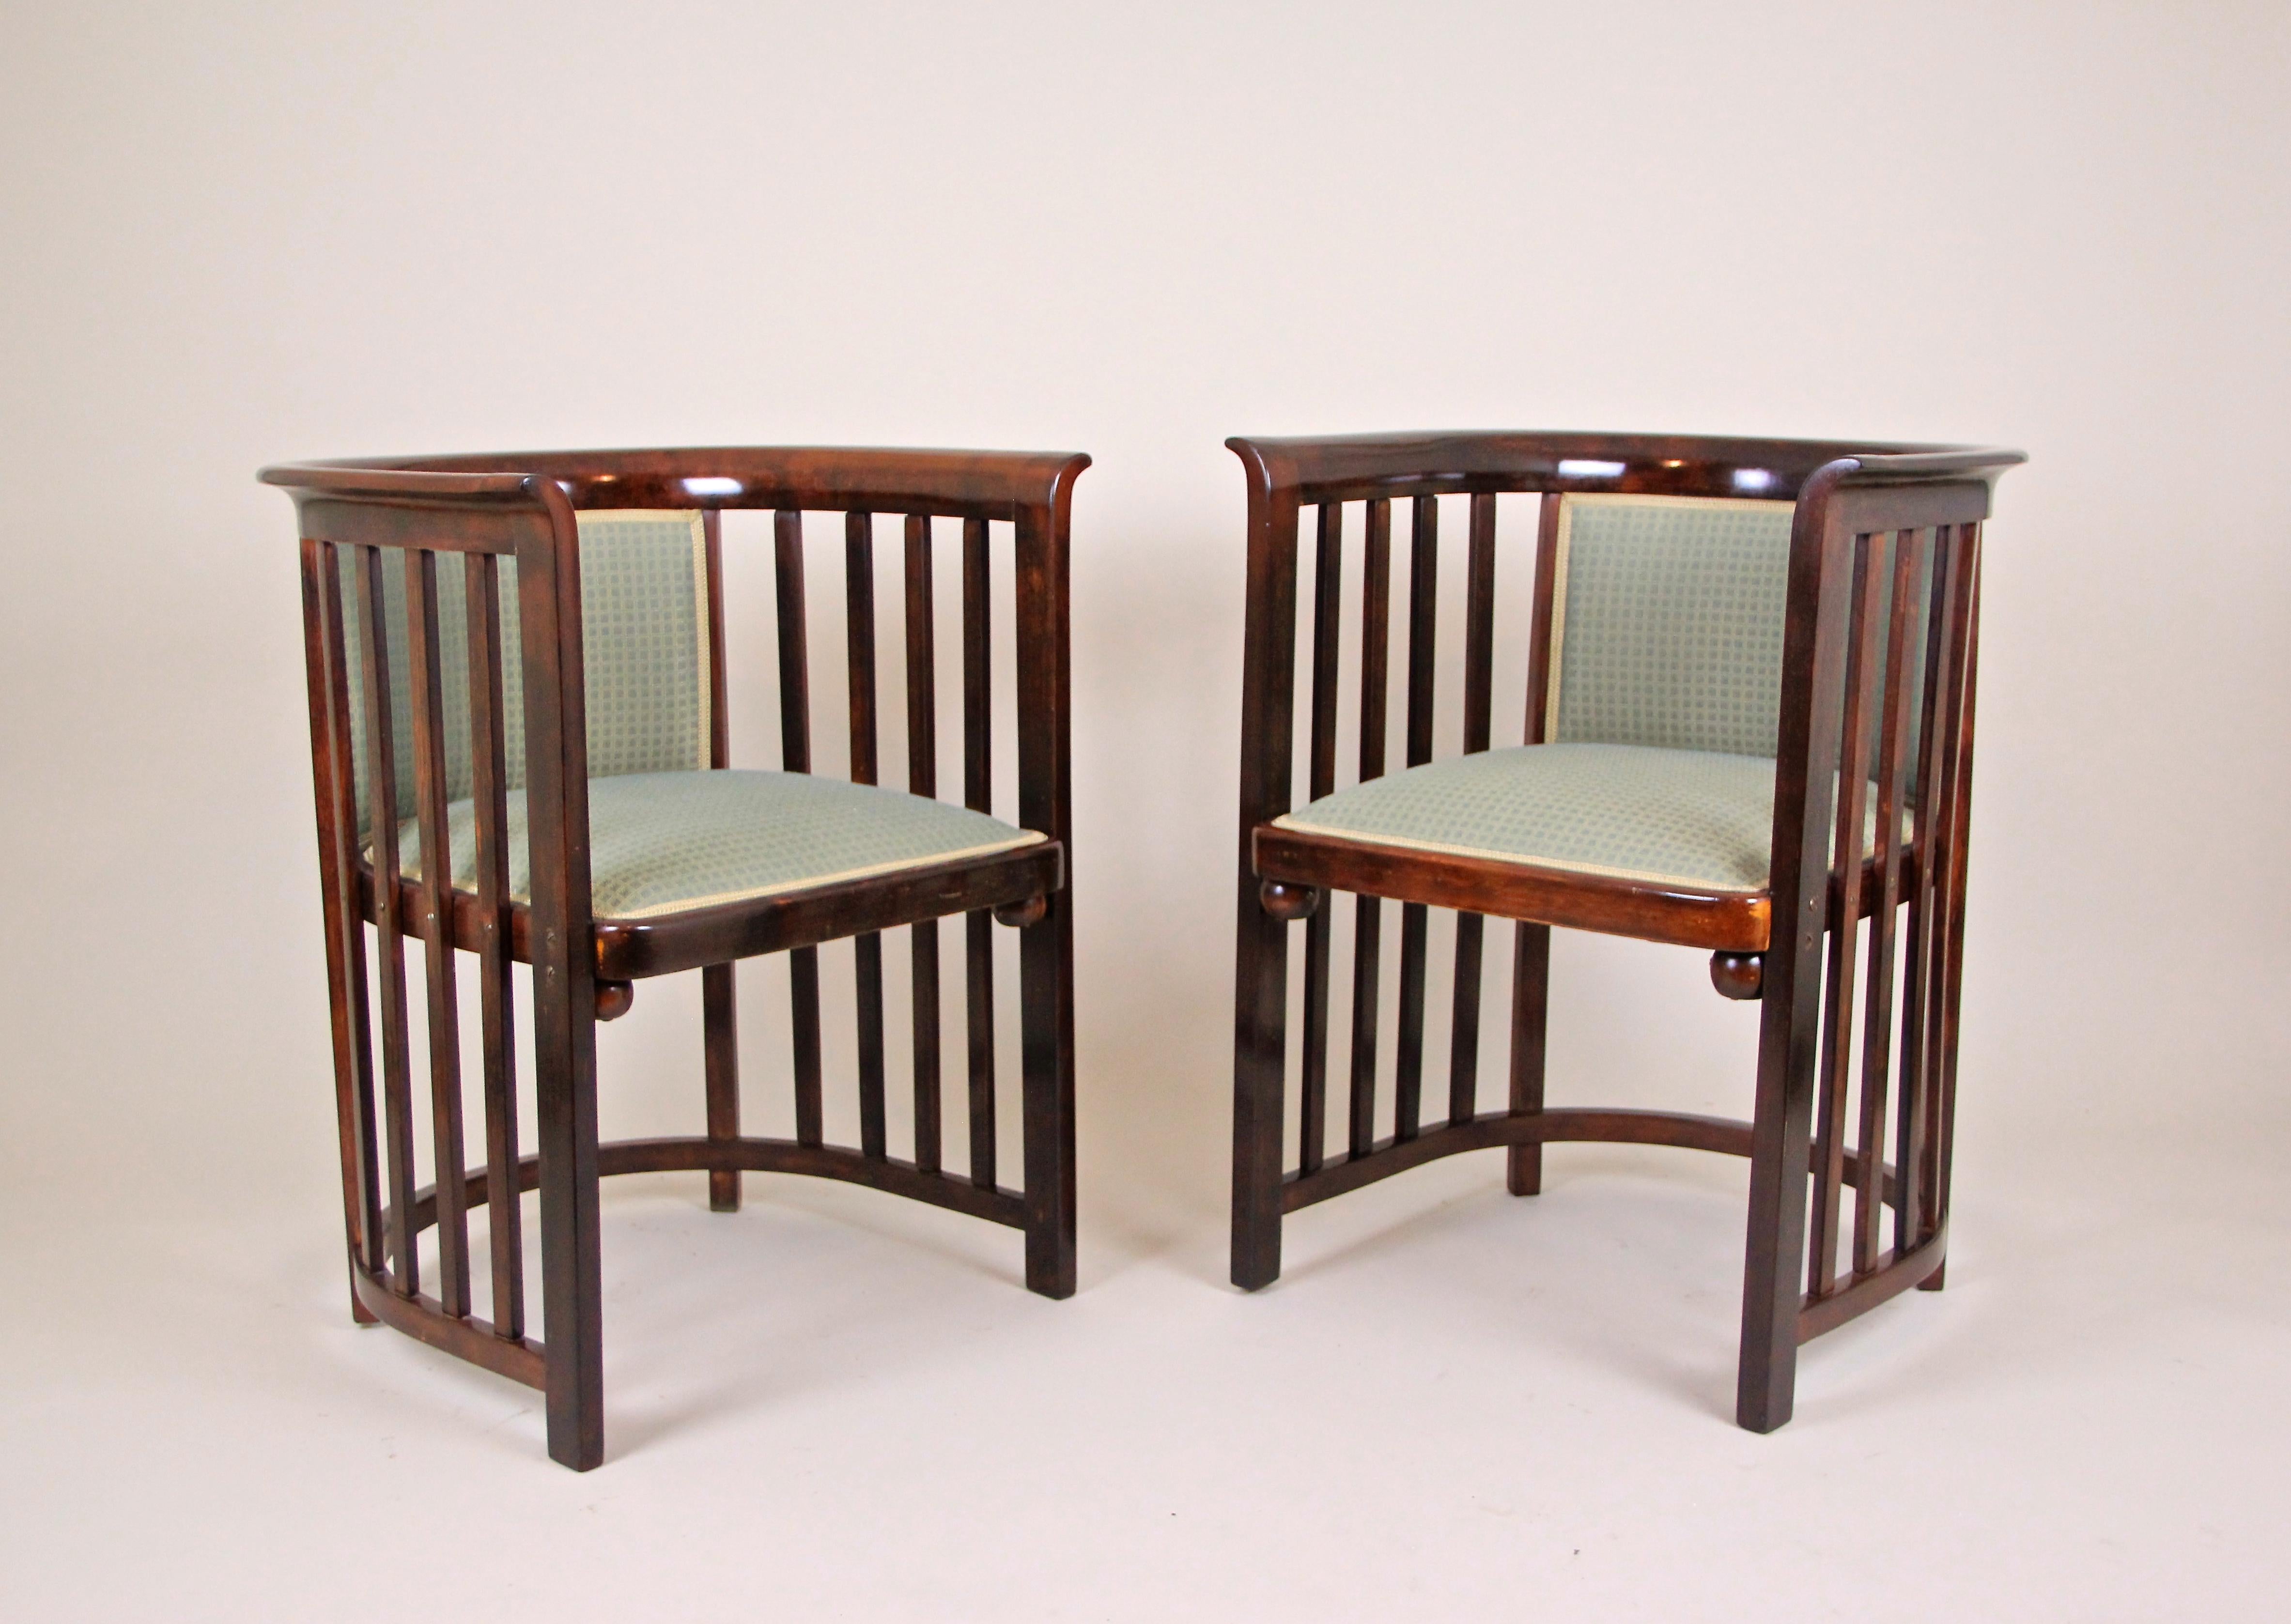 Stunning bentwood seating set designed by the famous austrian architect and founding member of the world famous 